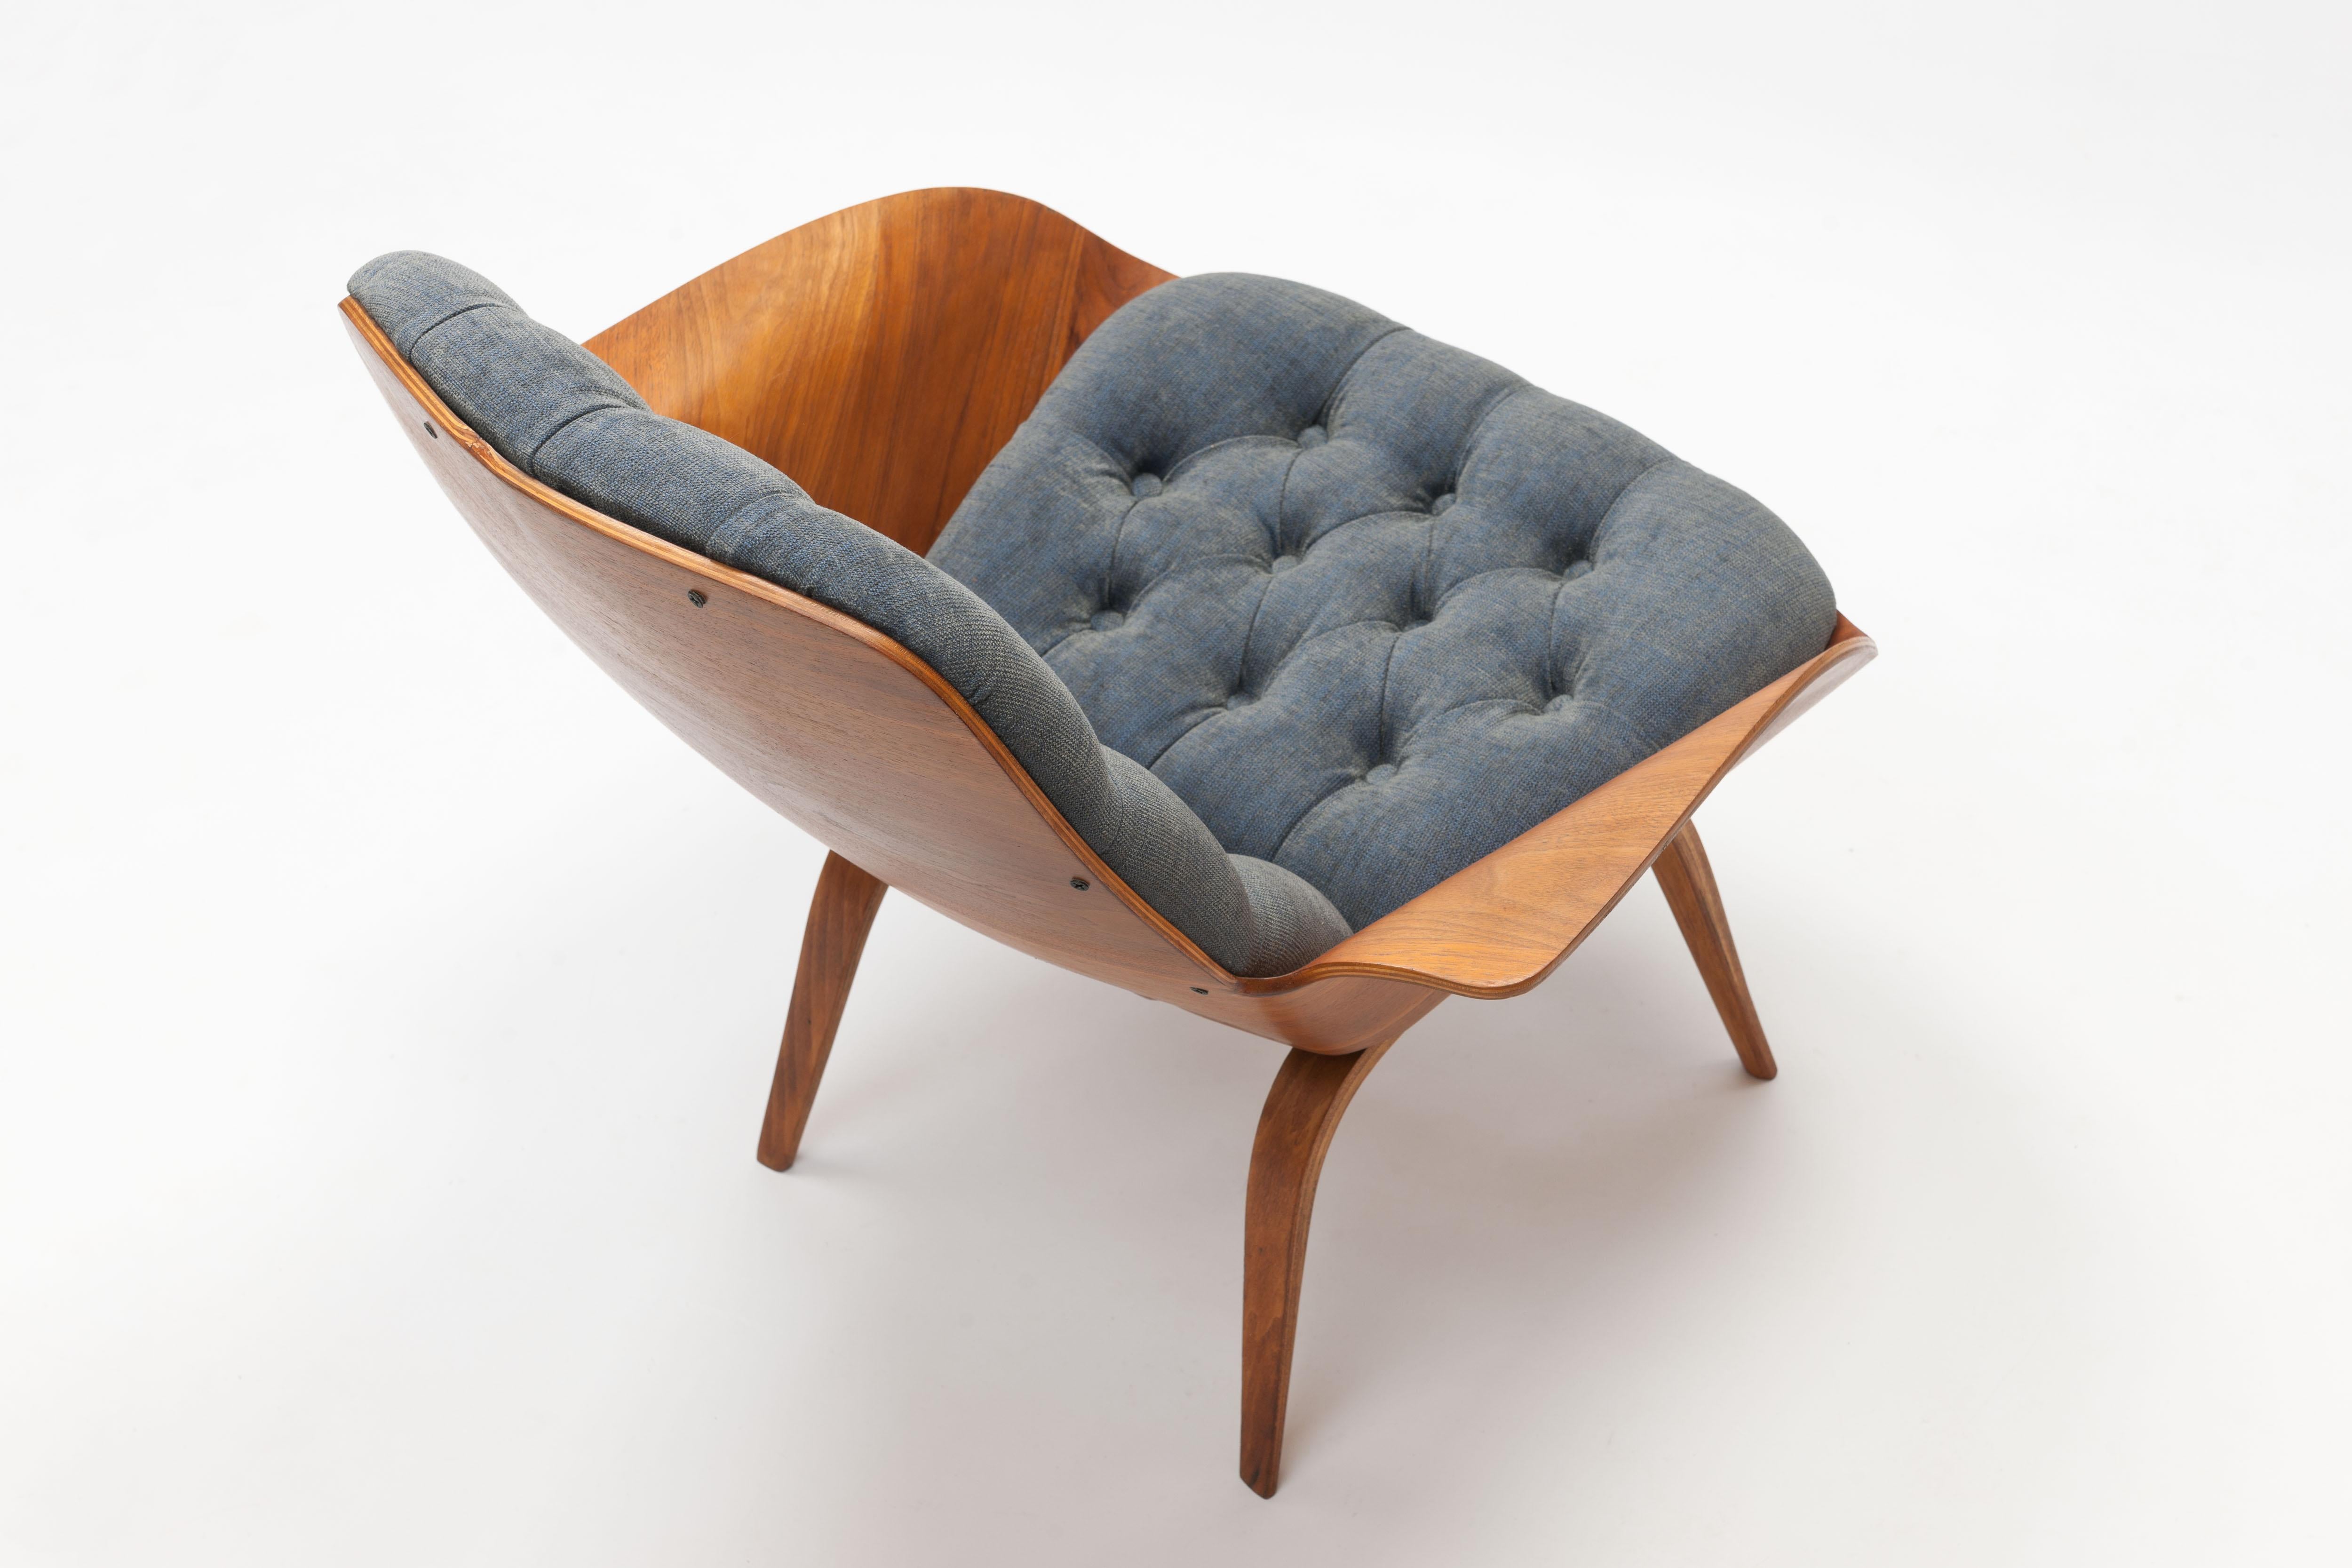 American walnut plywood lounge chair from the 1960s by American designer George Mulhauser.
This is a smaller version with more rarely seen wooden legs of the larger, and more famous, 